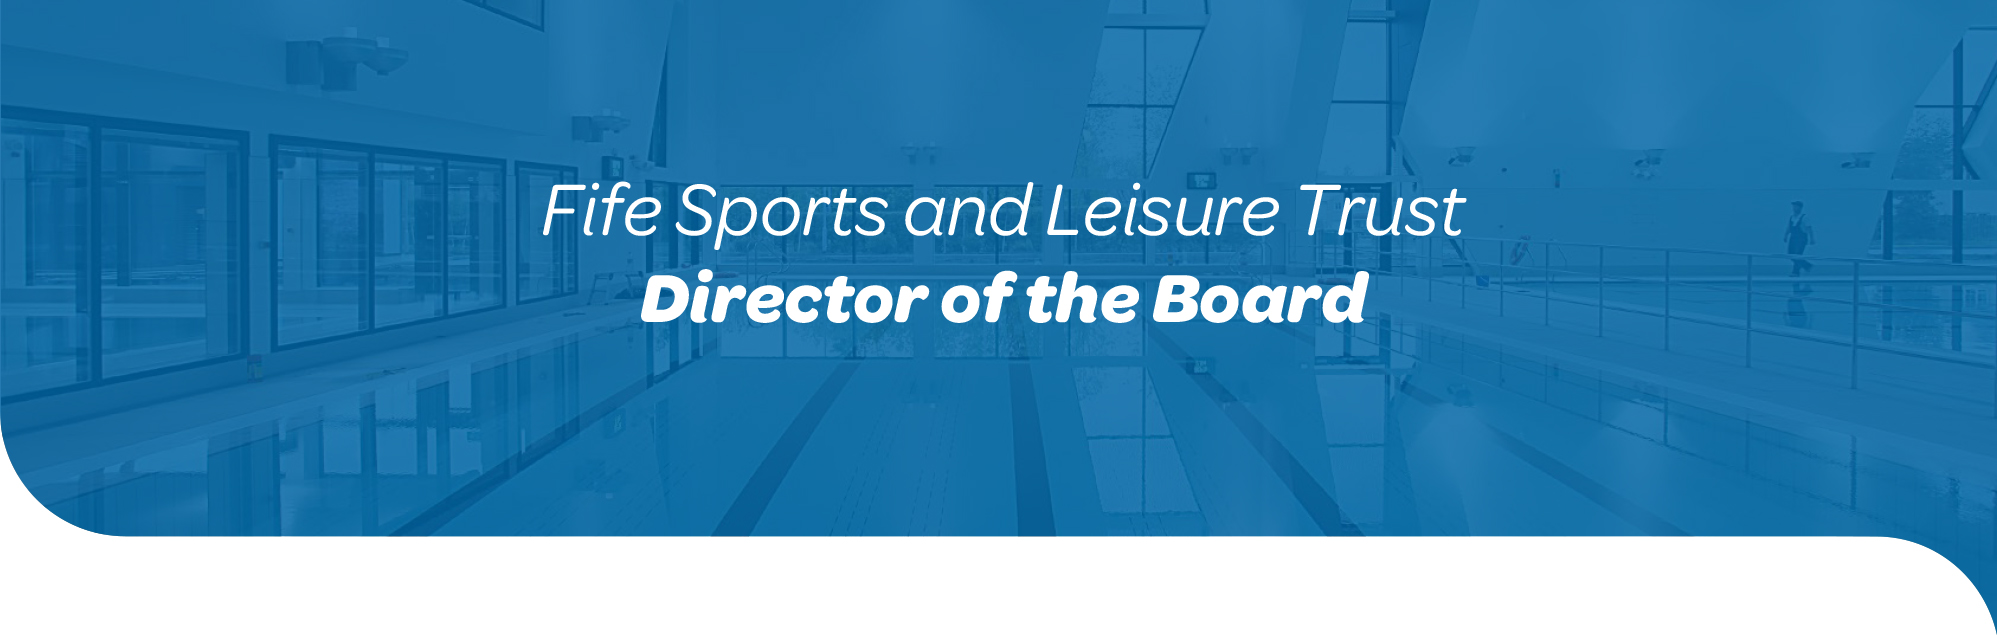 Director of the Board